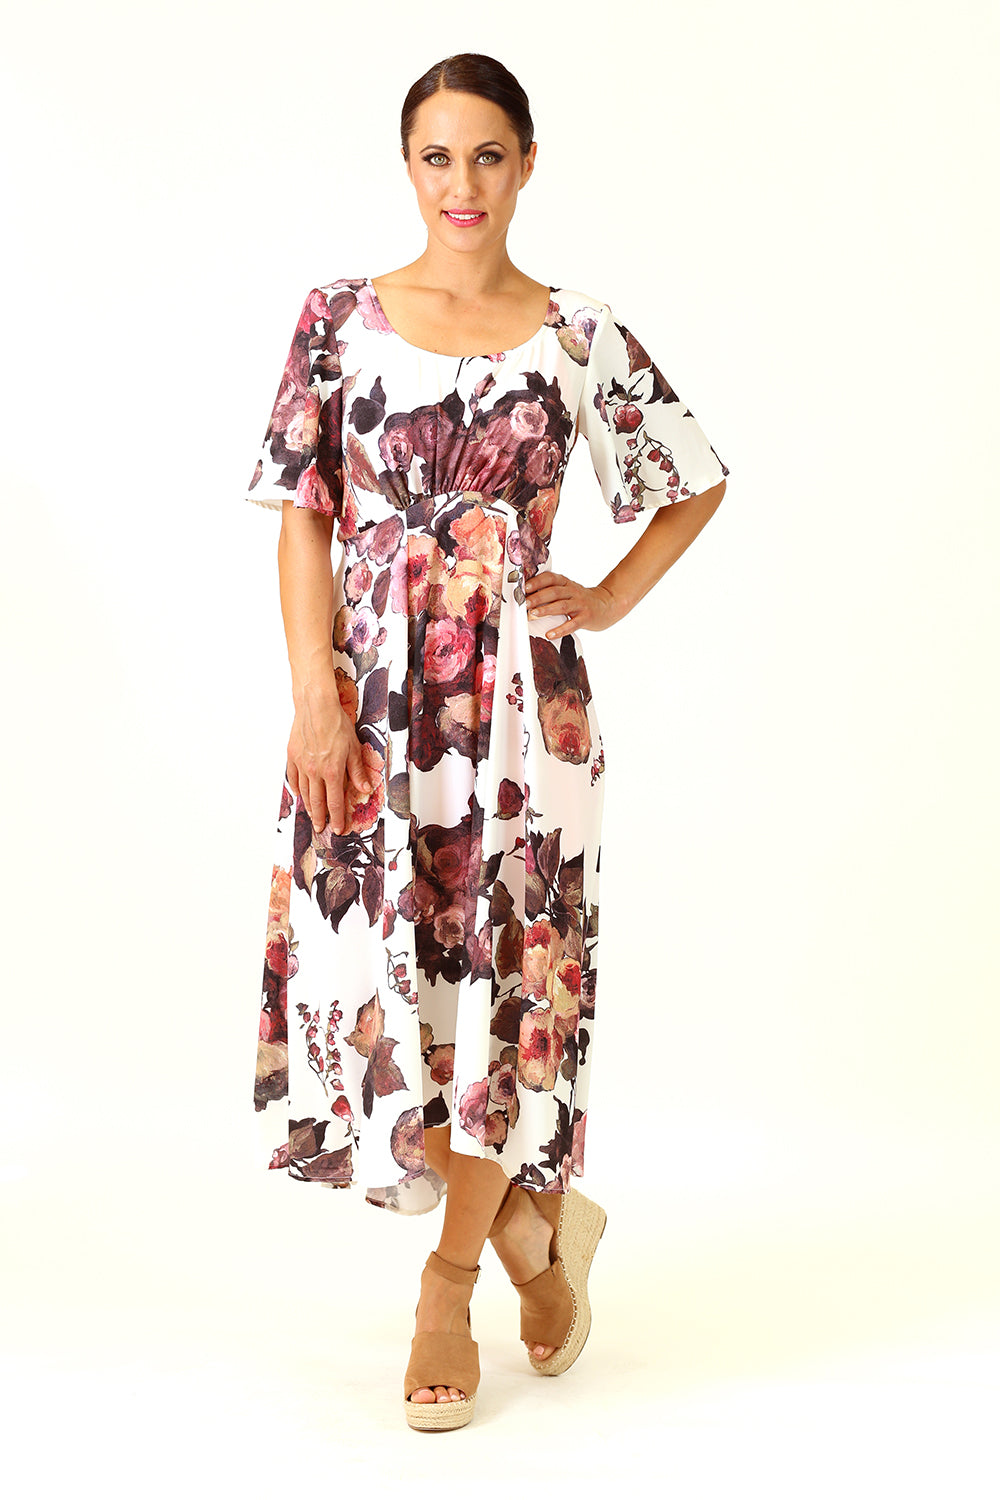 Down Town Dresses - Our Best Selling Dress | Annah Stretton